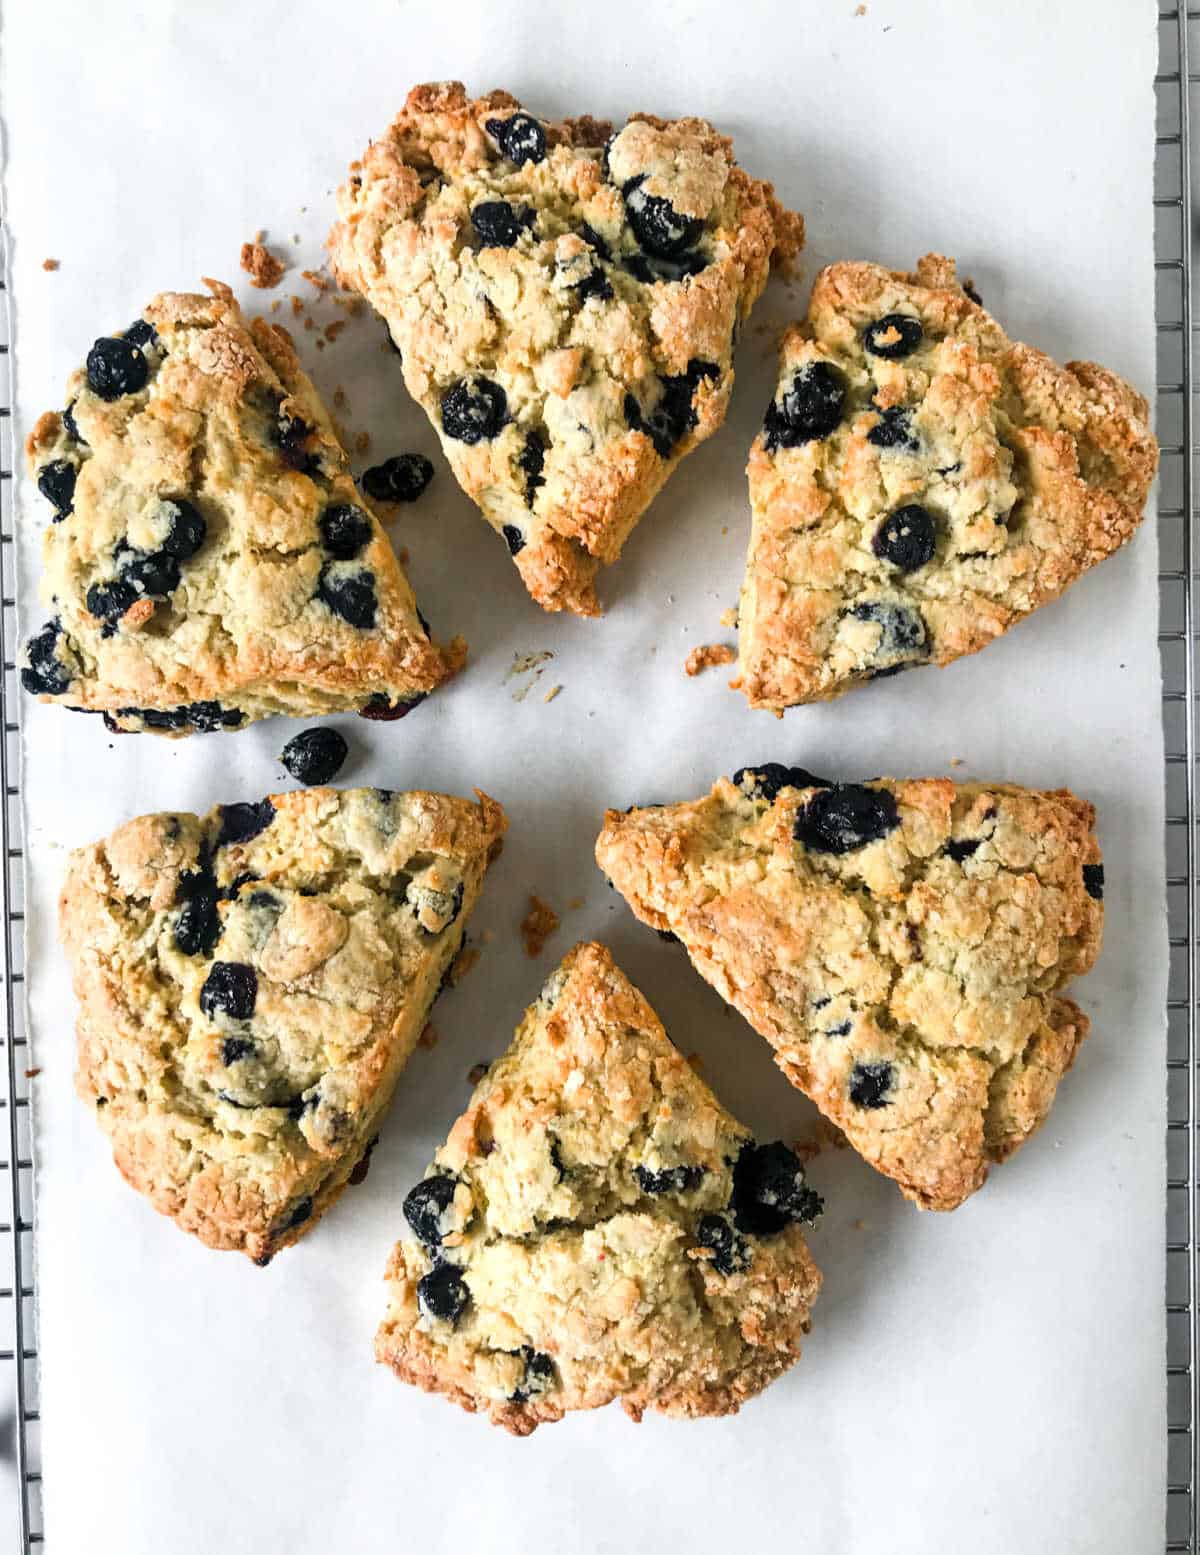 Top view of baked blueberry scones in a circle on white parchment paper.